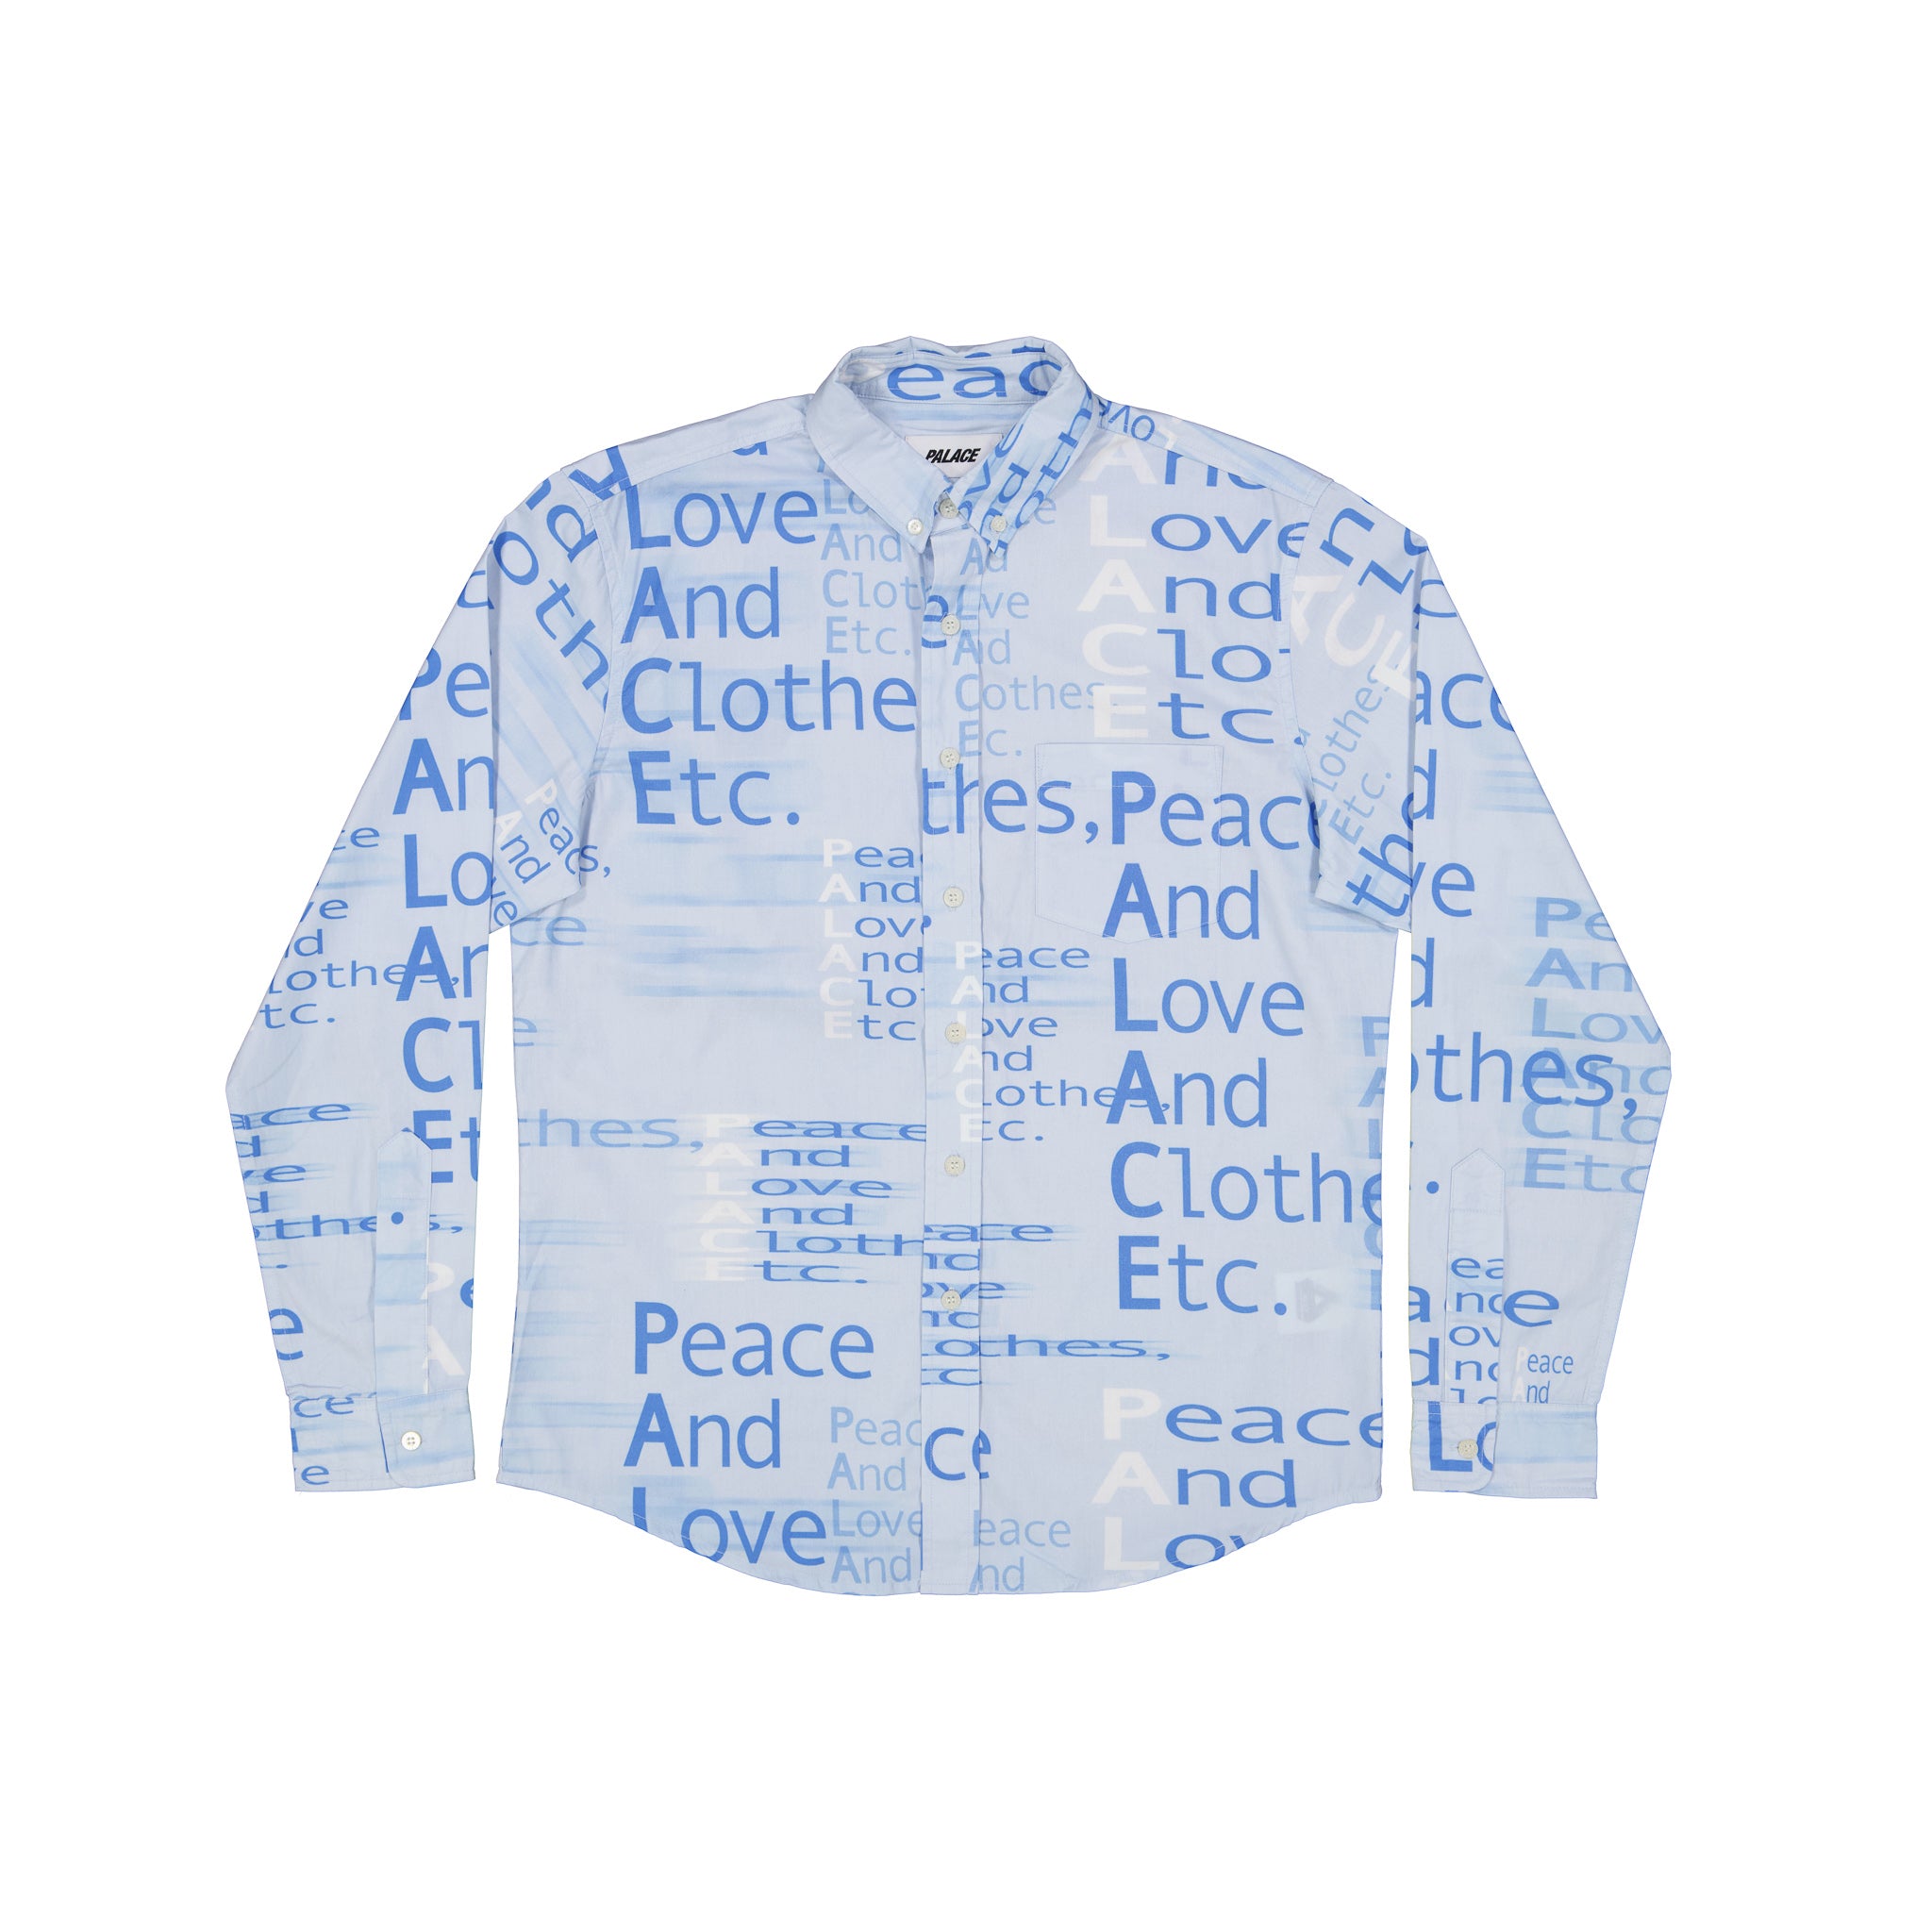 Palace This Is What Palace Stands For Shirt Blue - SPRMRKT